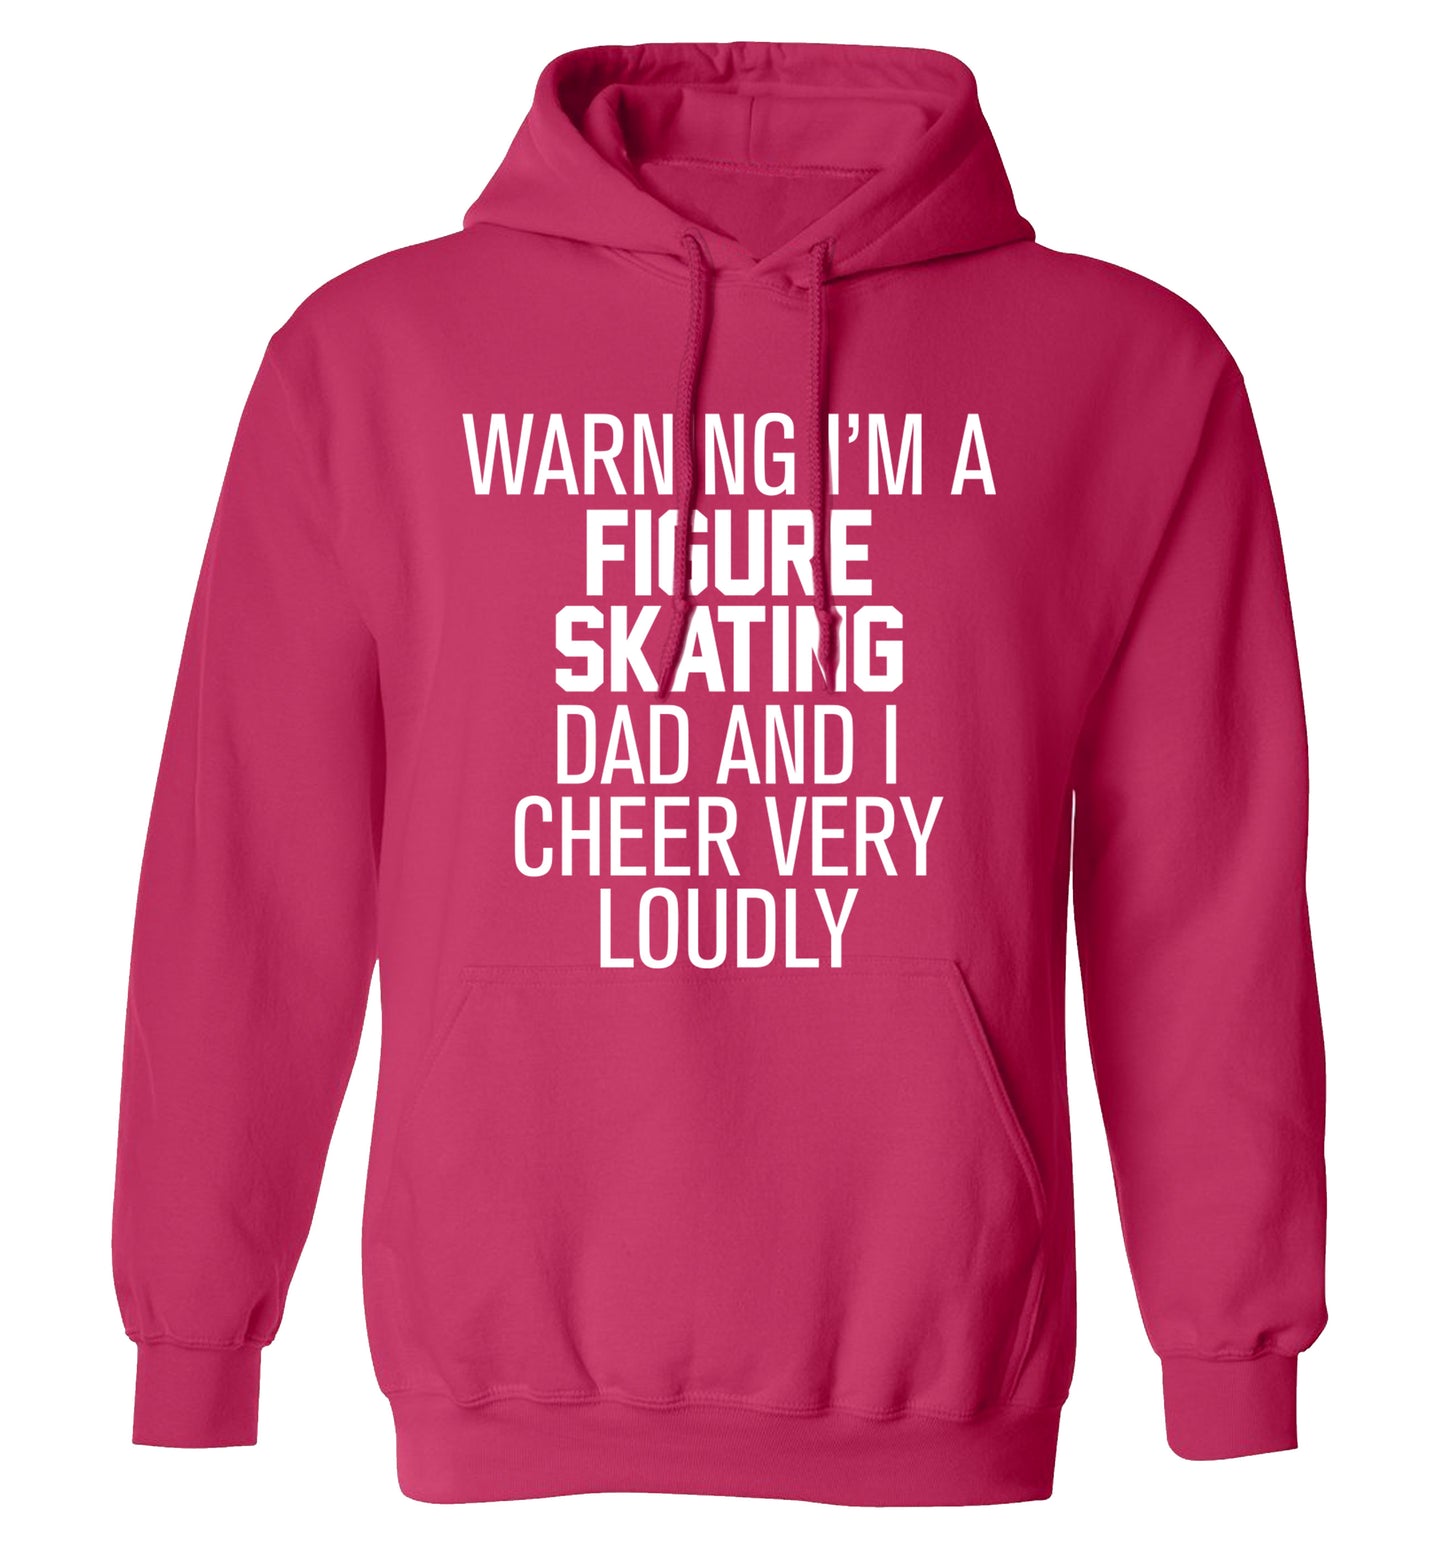 Warning I'm a figure skating dad and I cheer very loudly adults unisexpink hoodie 2XL